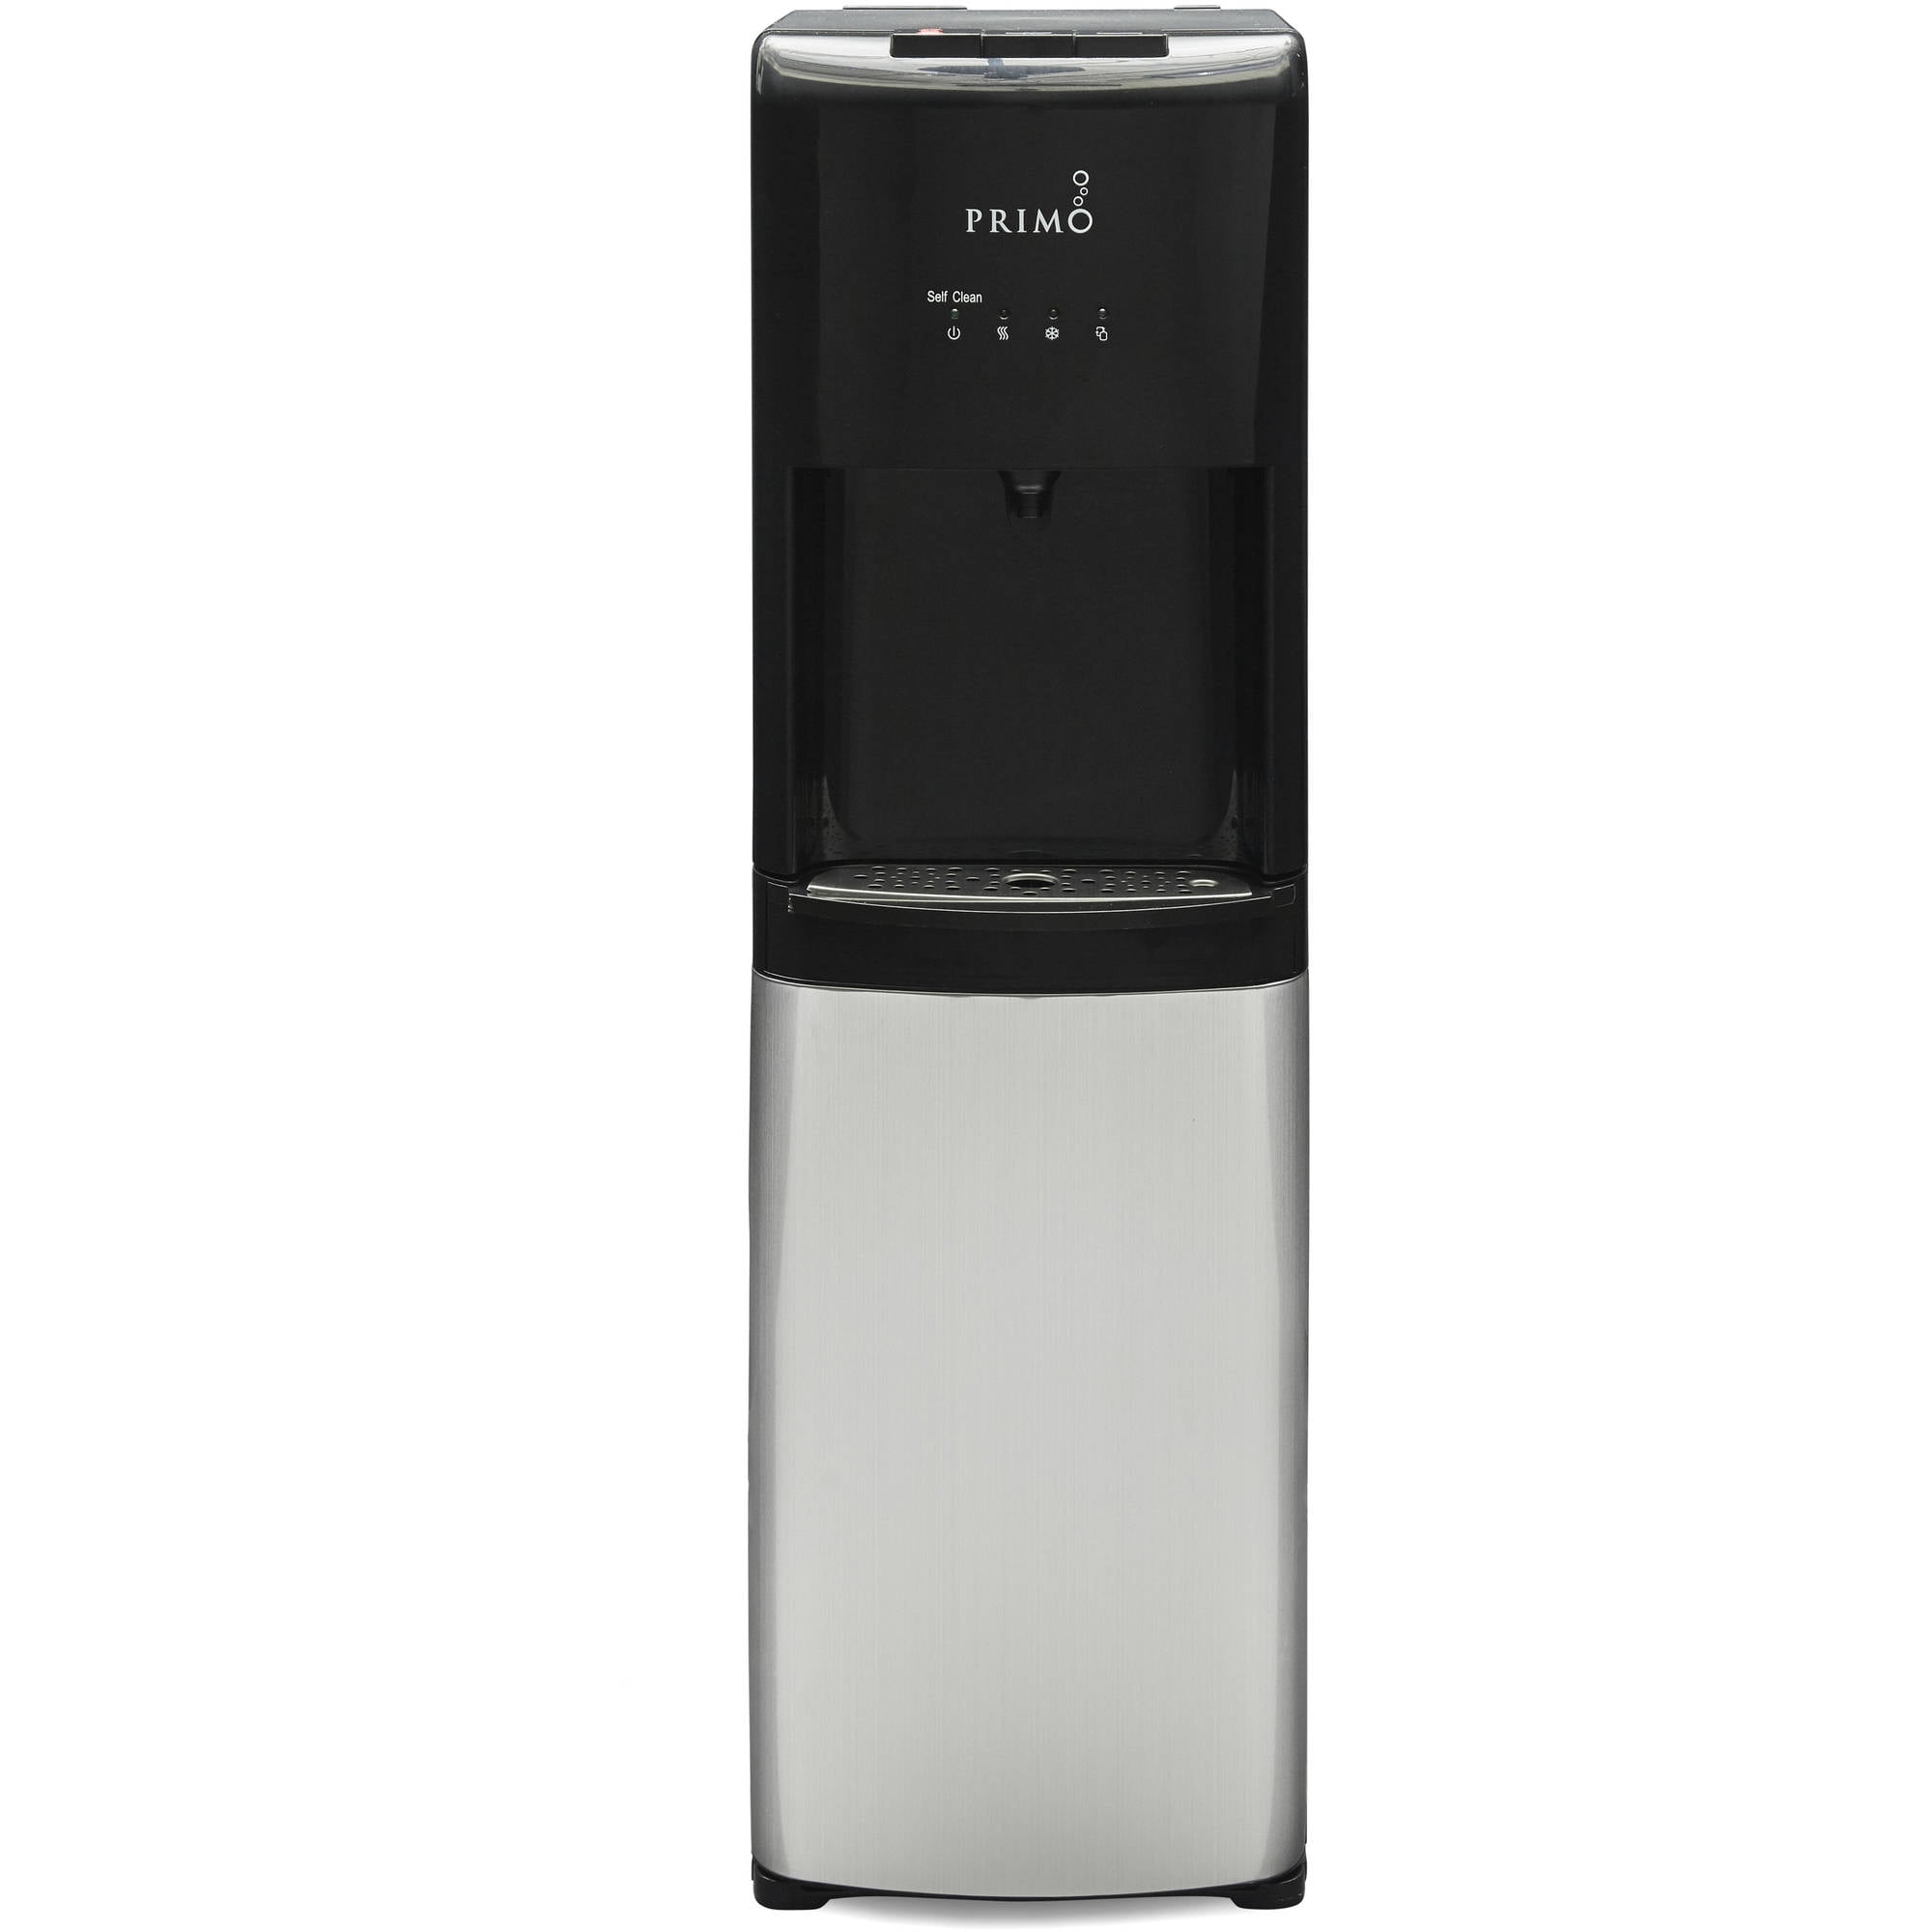 No more GenX water. Any thoughts on the Primo water dispenser? Just got  this. : r/NorthCarolina